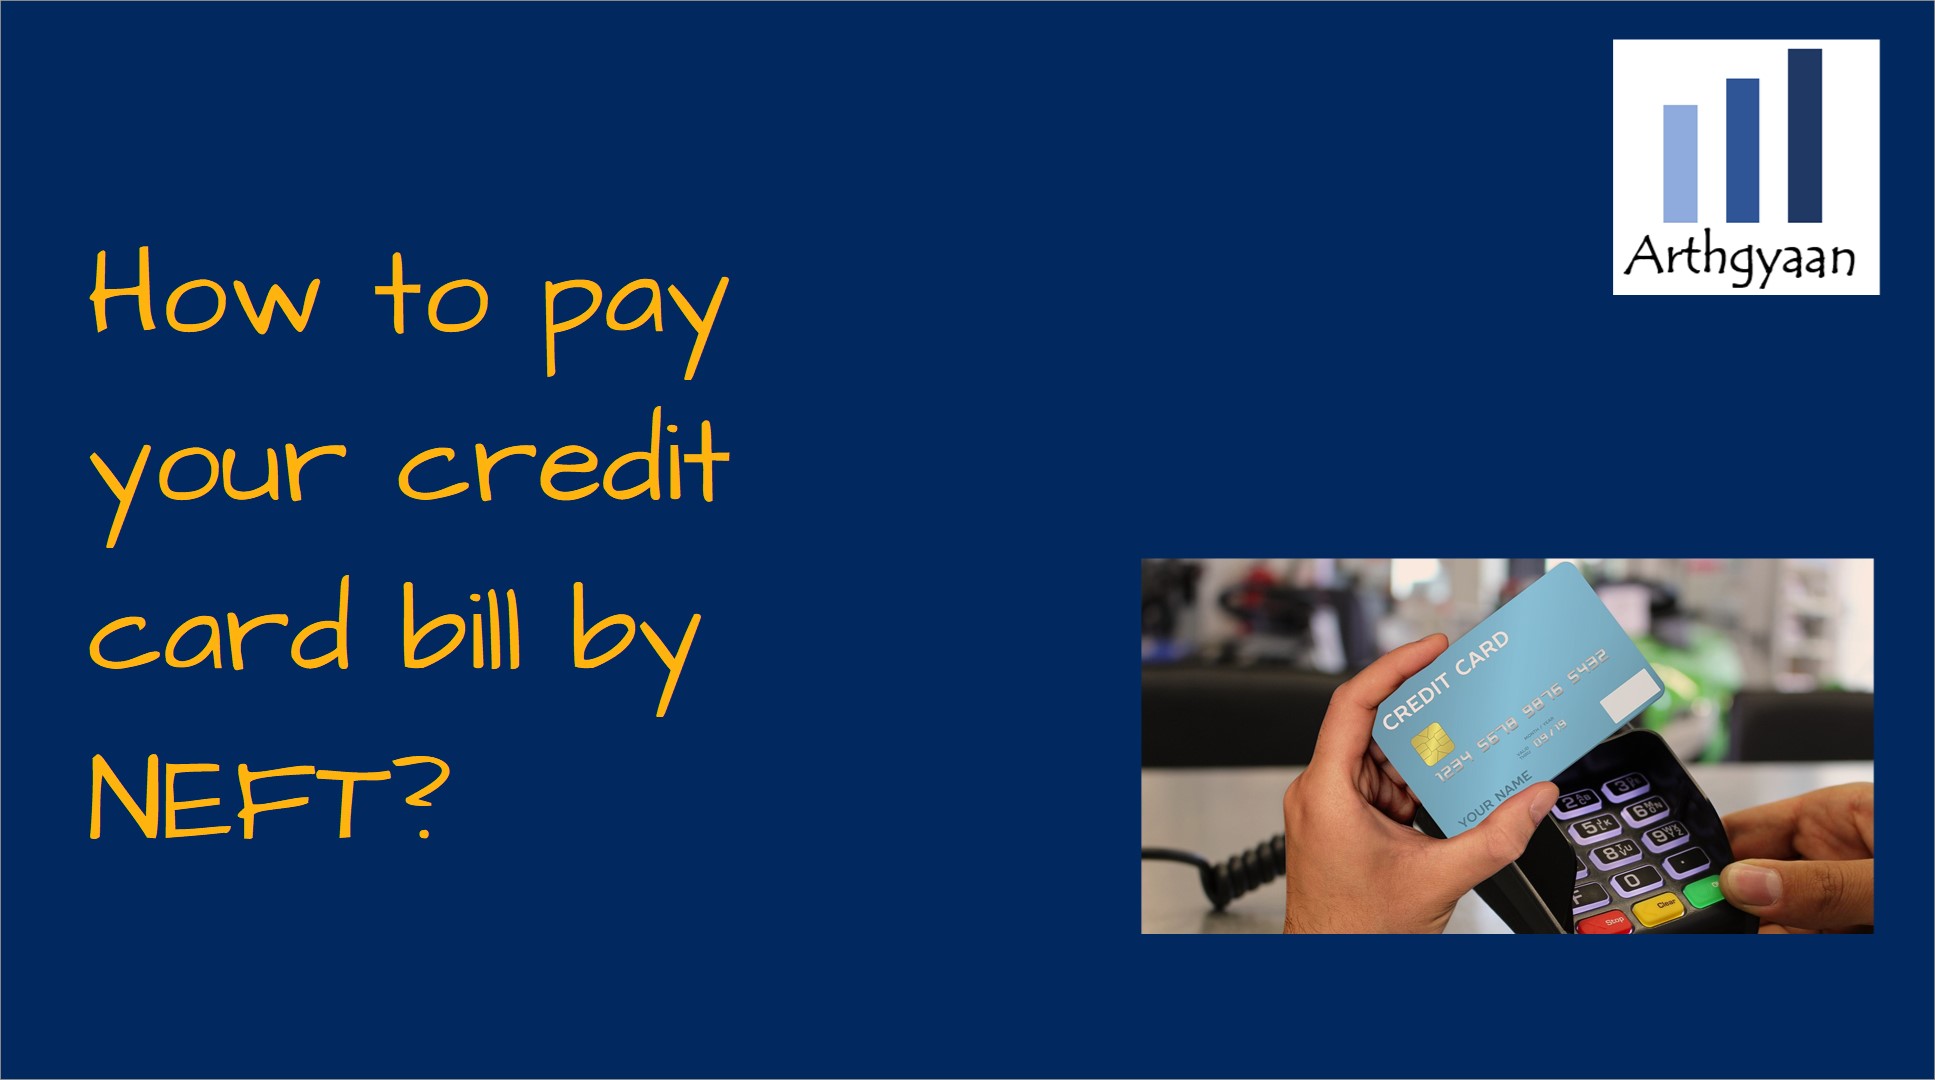 How to pay your credit card bill by NEFT?